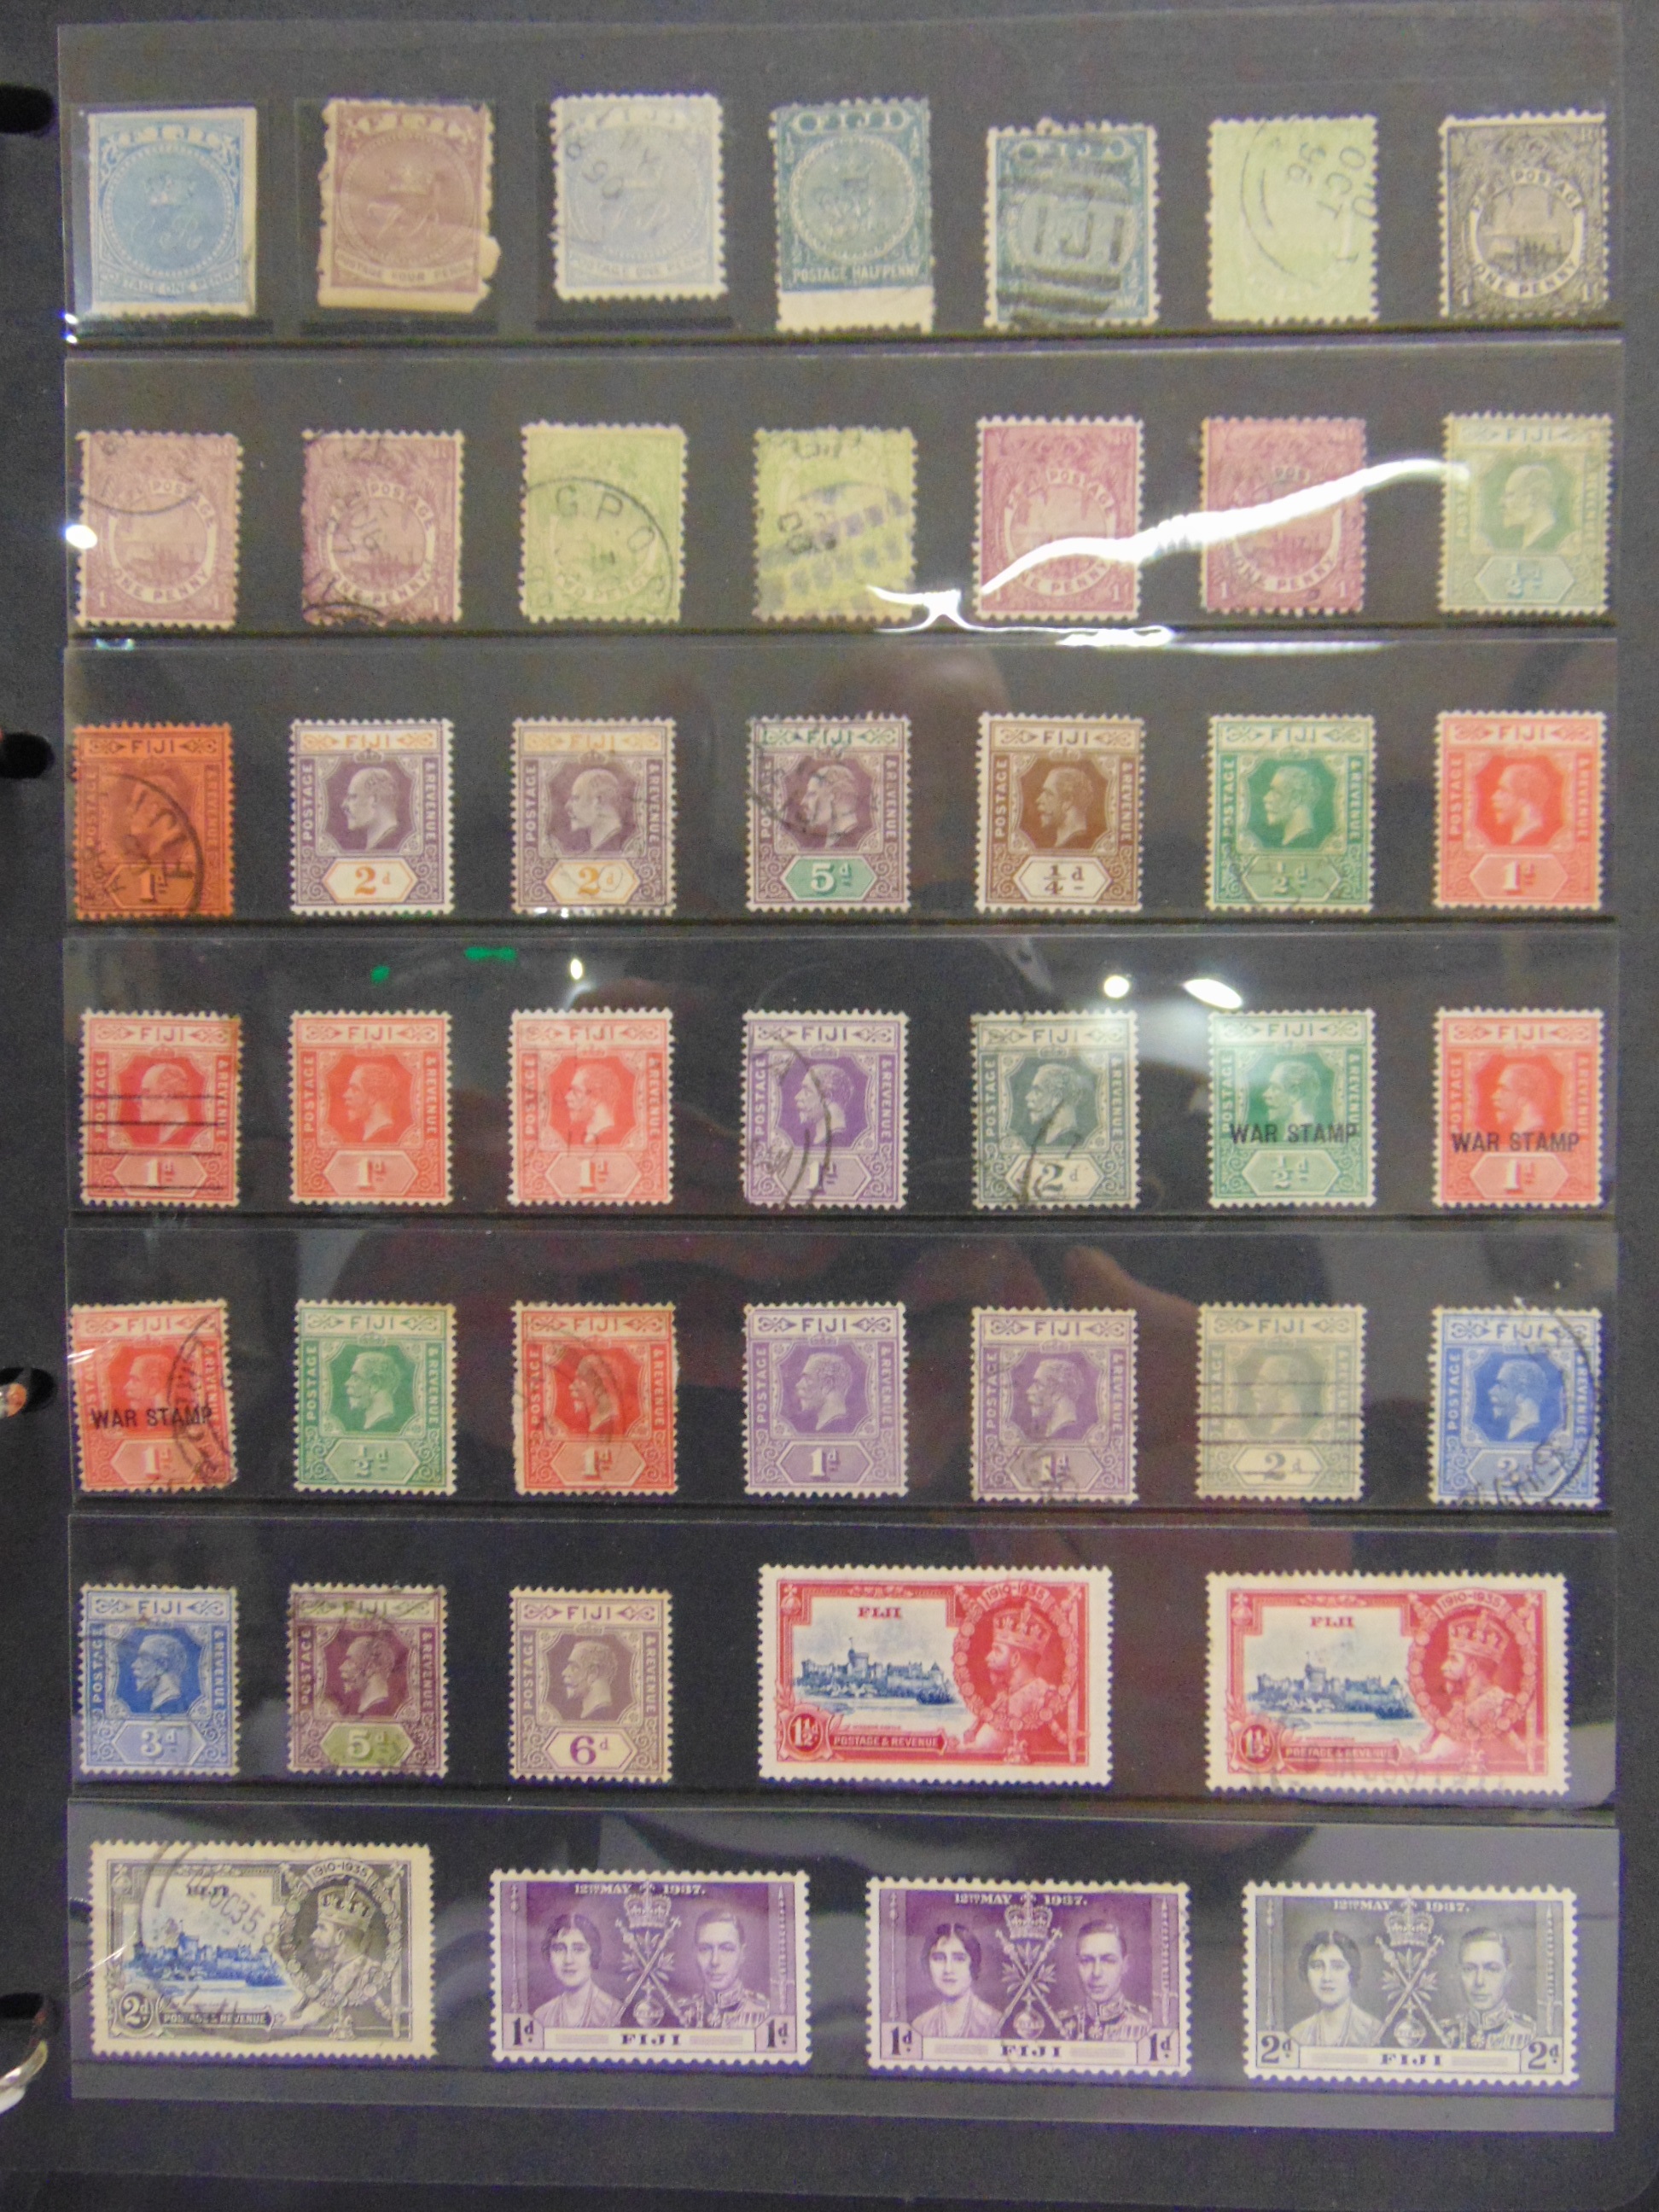 STAMPS - A PART-WORLD COLLECTION including the Falkland Islands, Fiji, The Gambia, Gold Coast / - Image 9 of 12